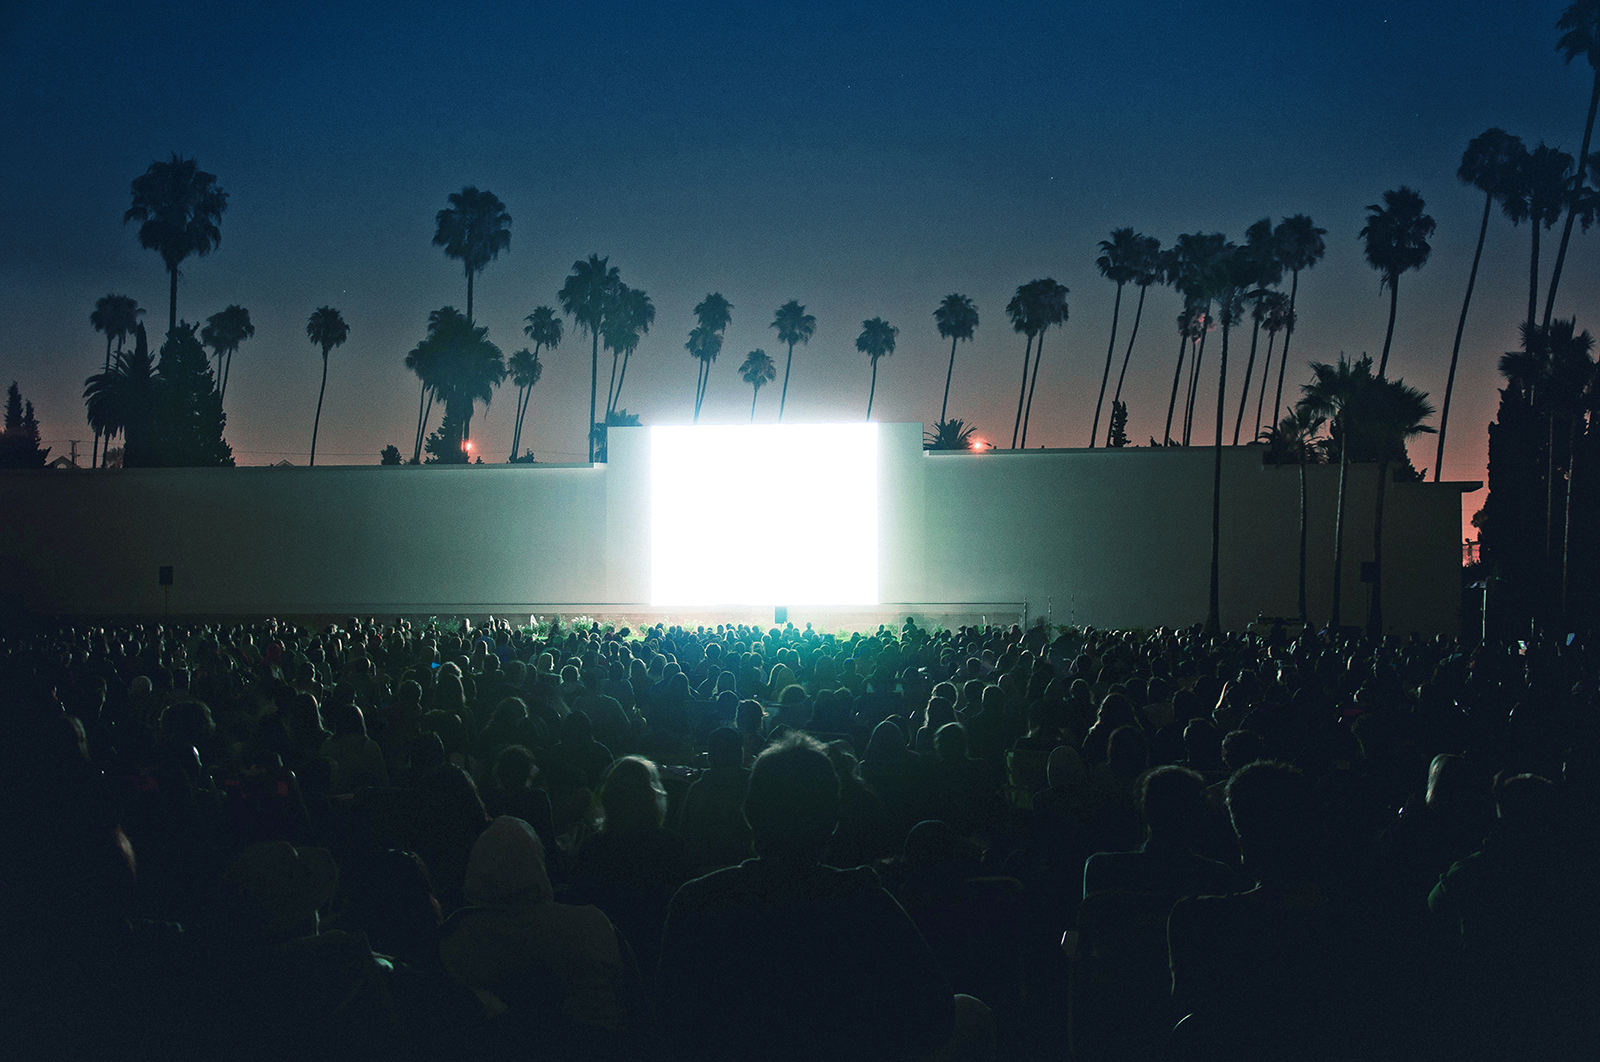 Cinespia Images Hollywood Forever Cemetery